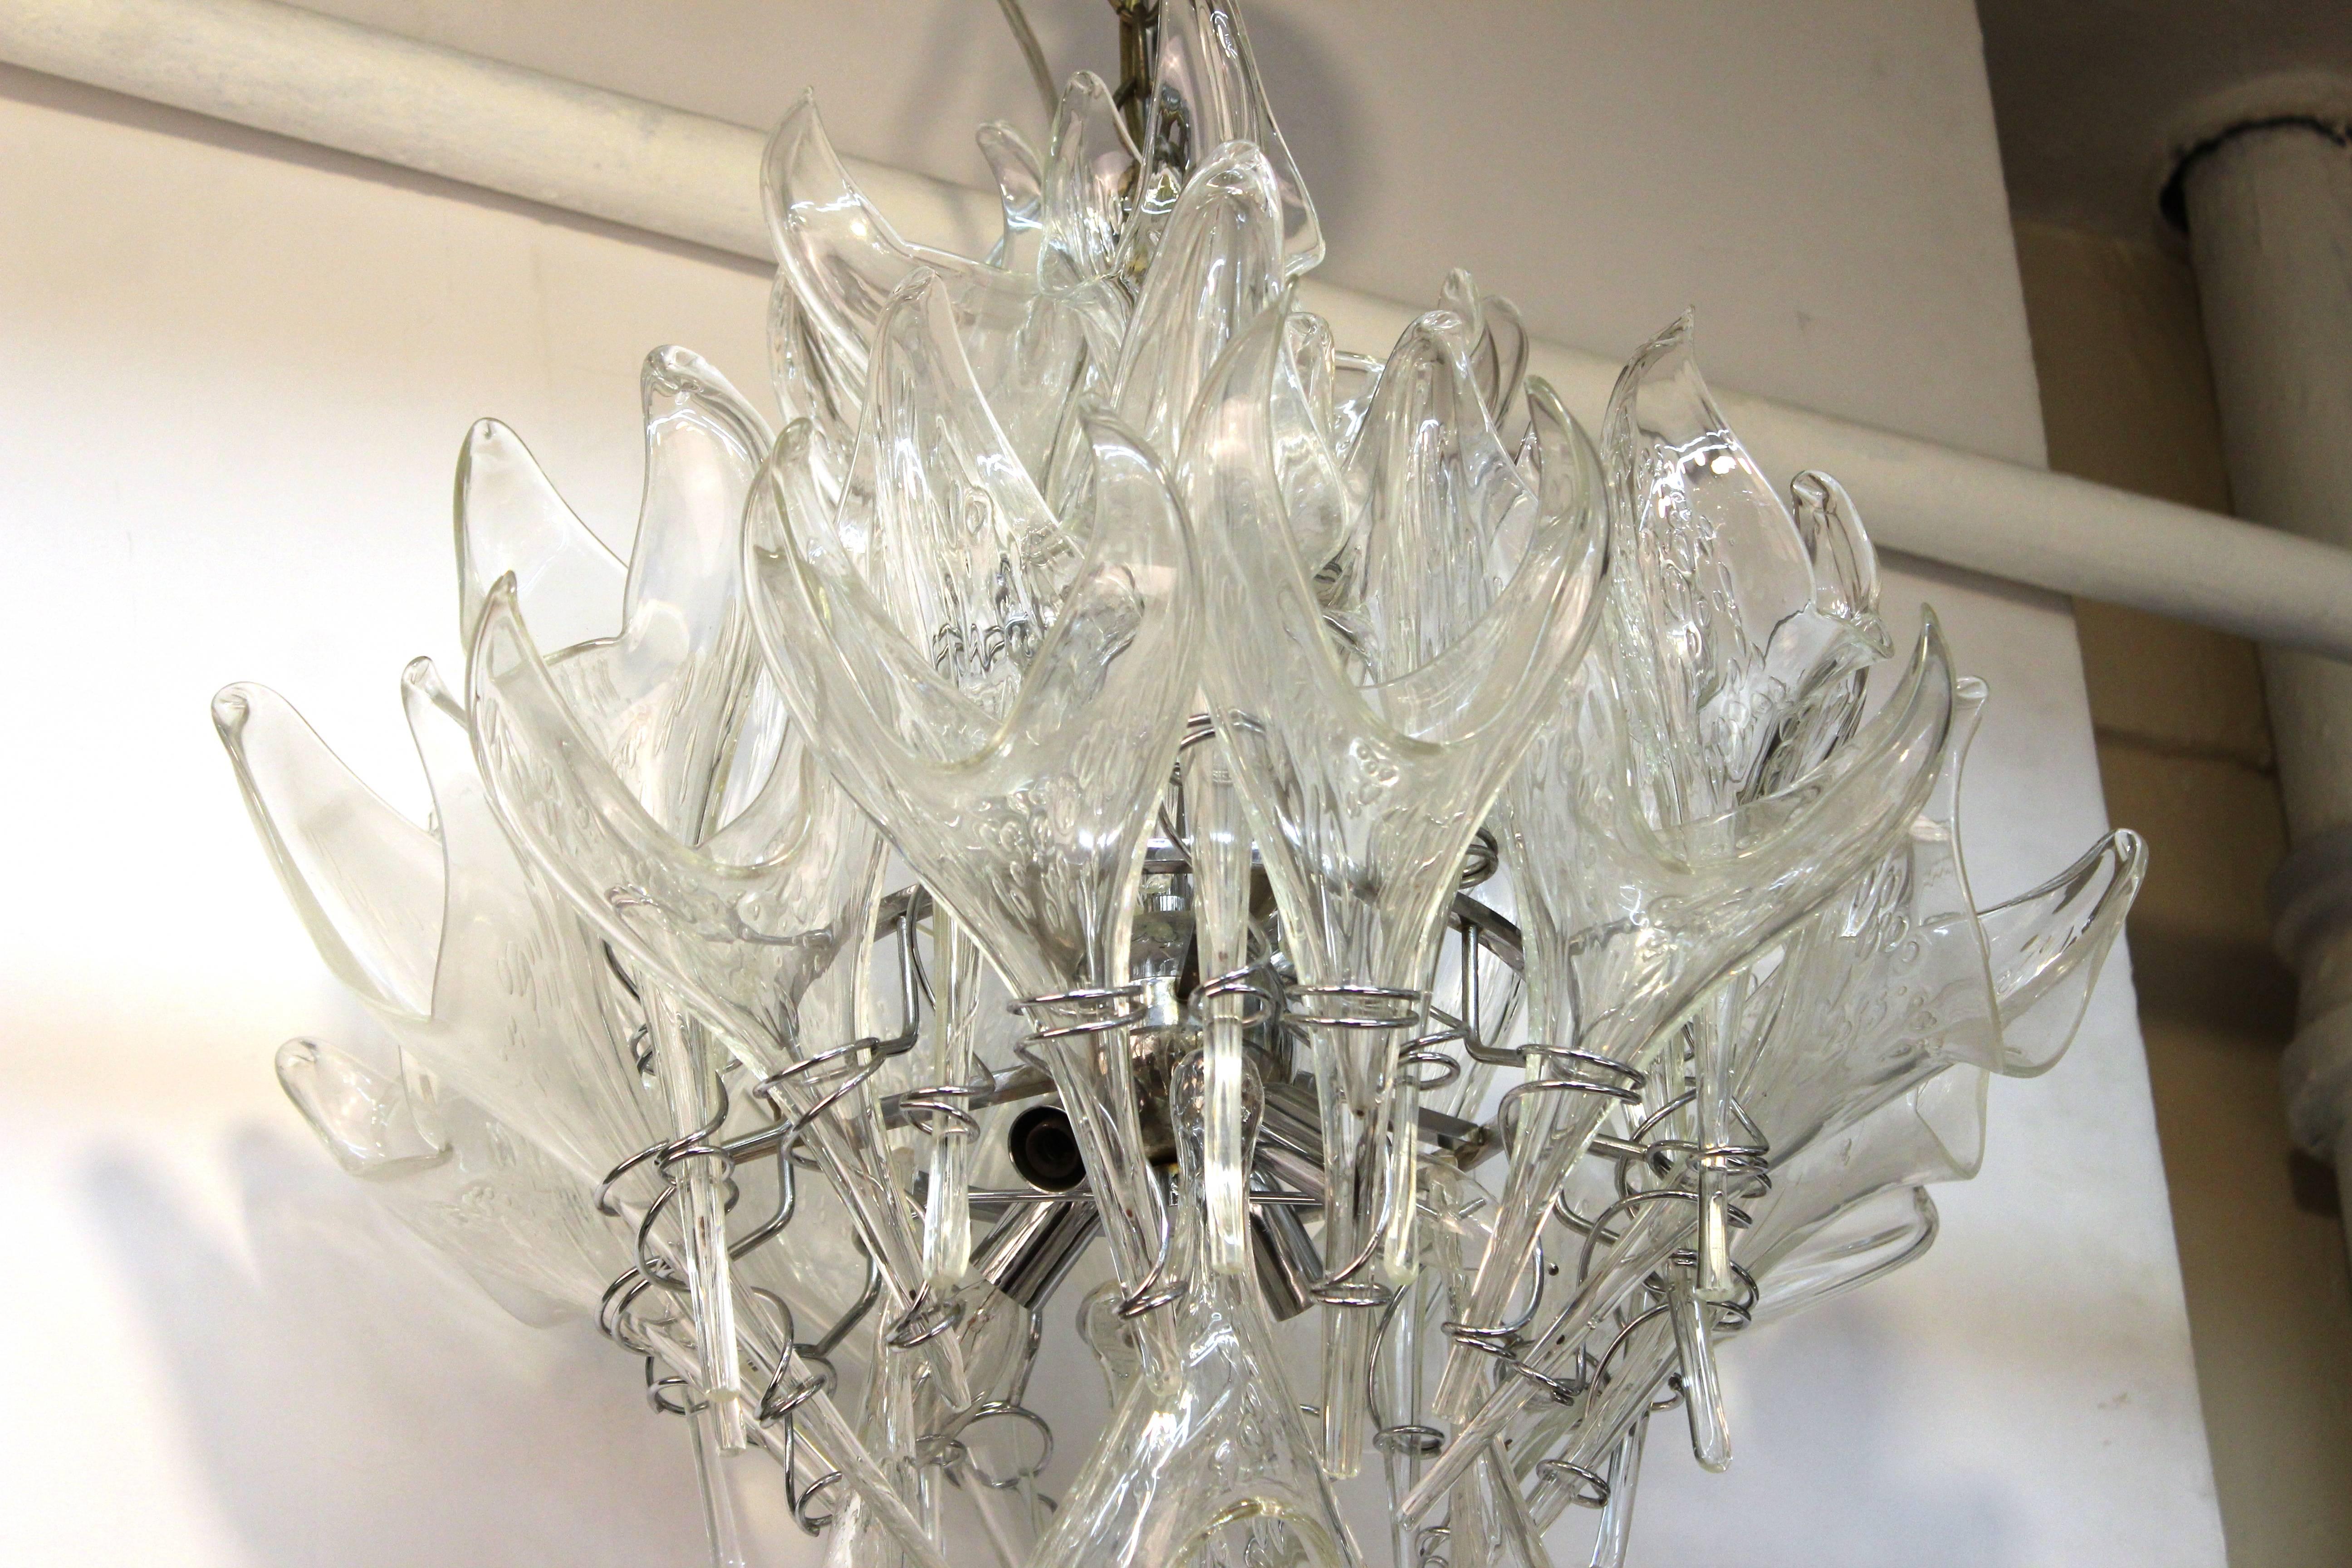 A Murano glass chandelier crafted with 